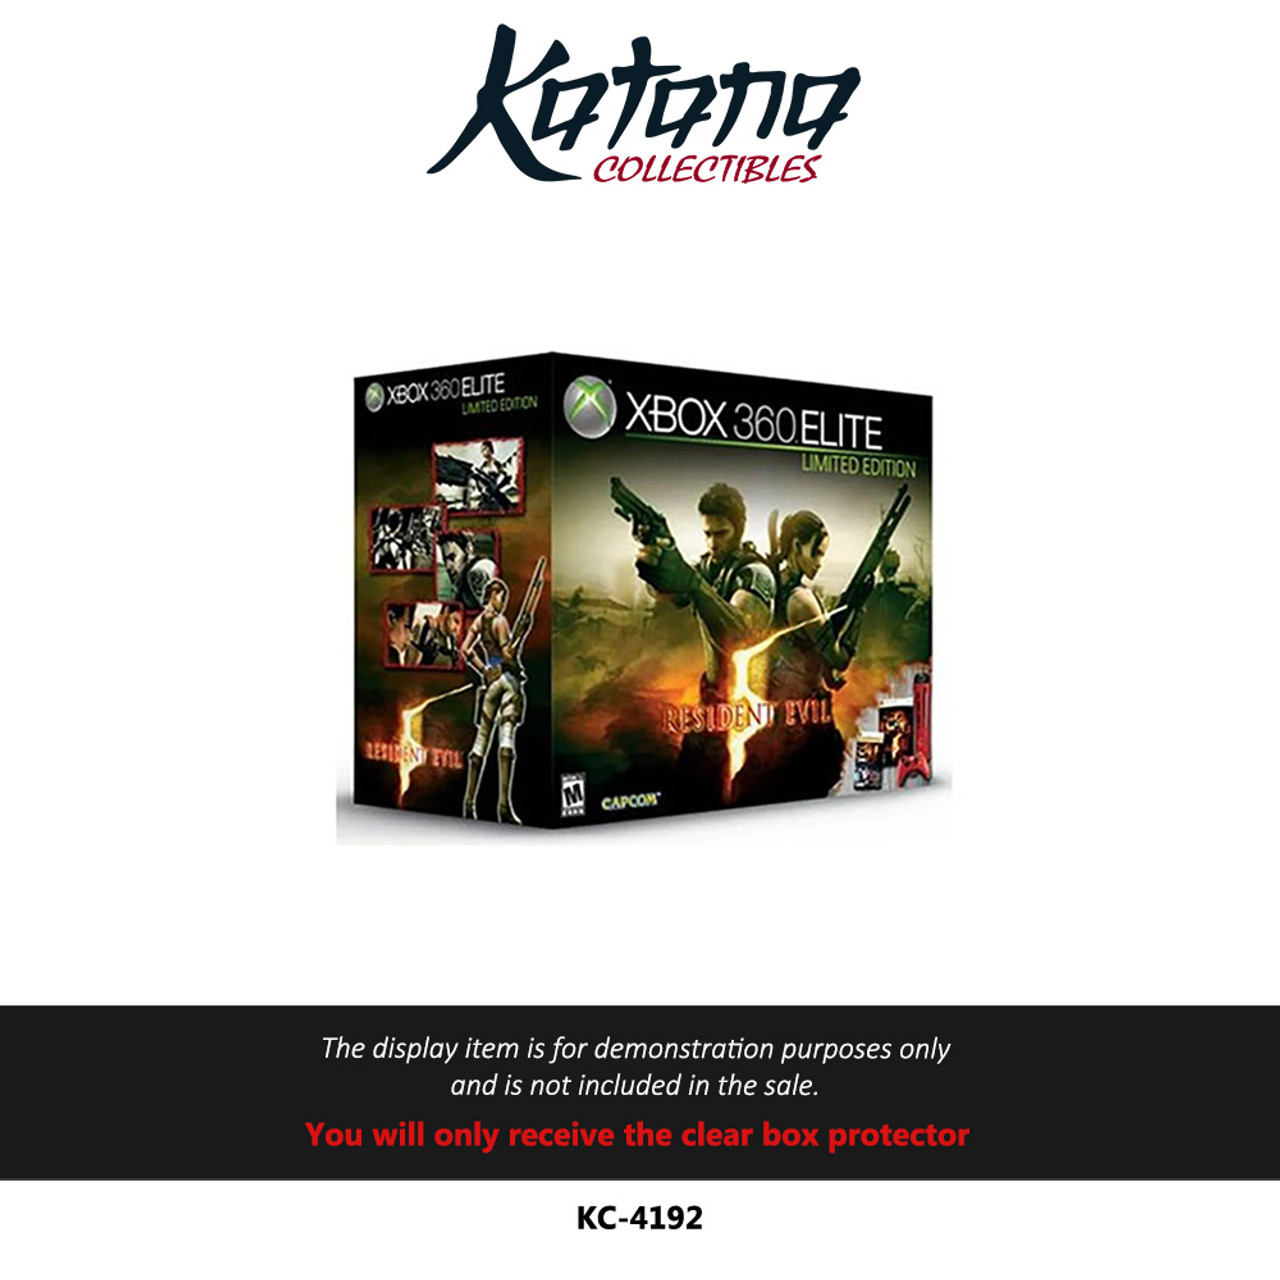 Katana Collectibles Protector For XBox 360 Elite Limited Edition Resident Evil